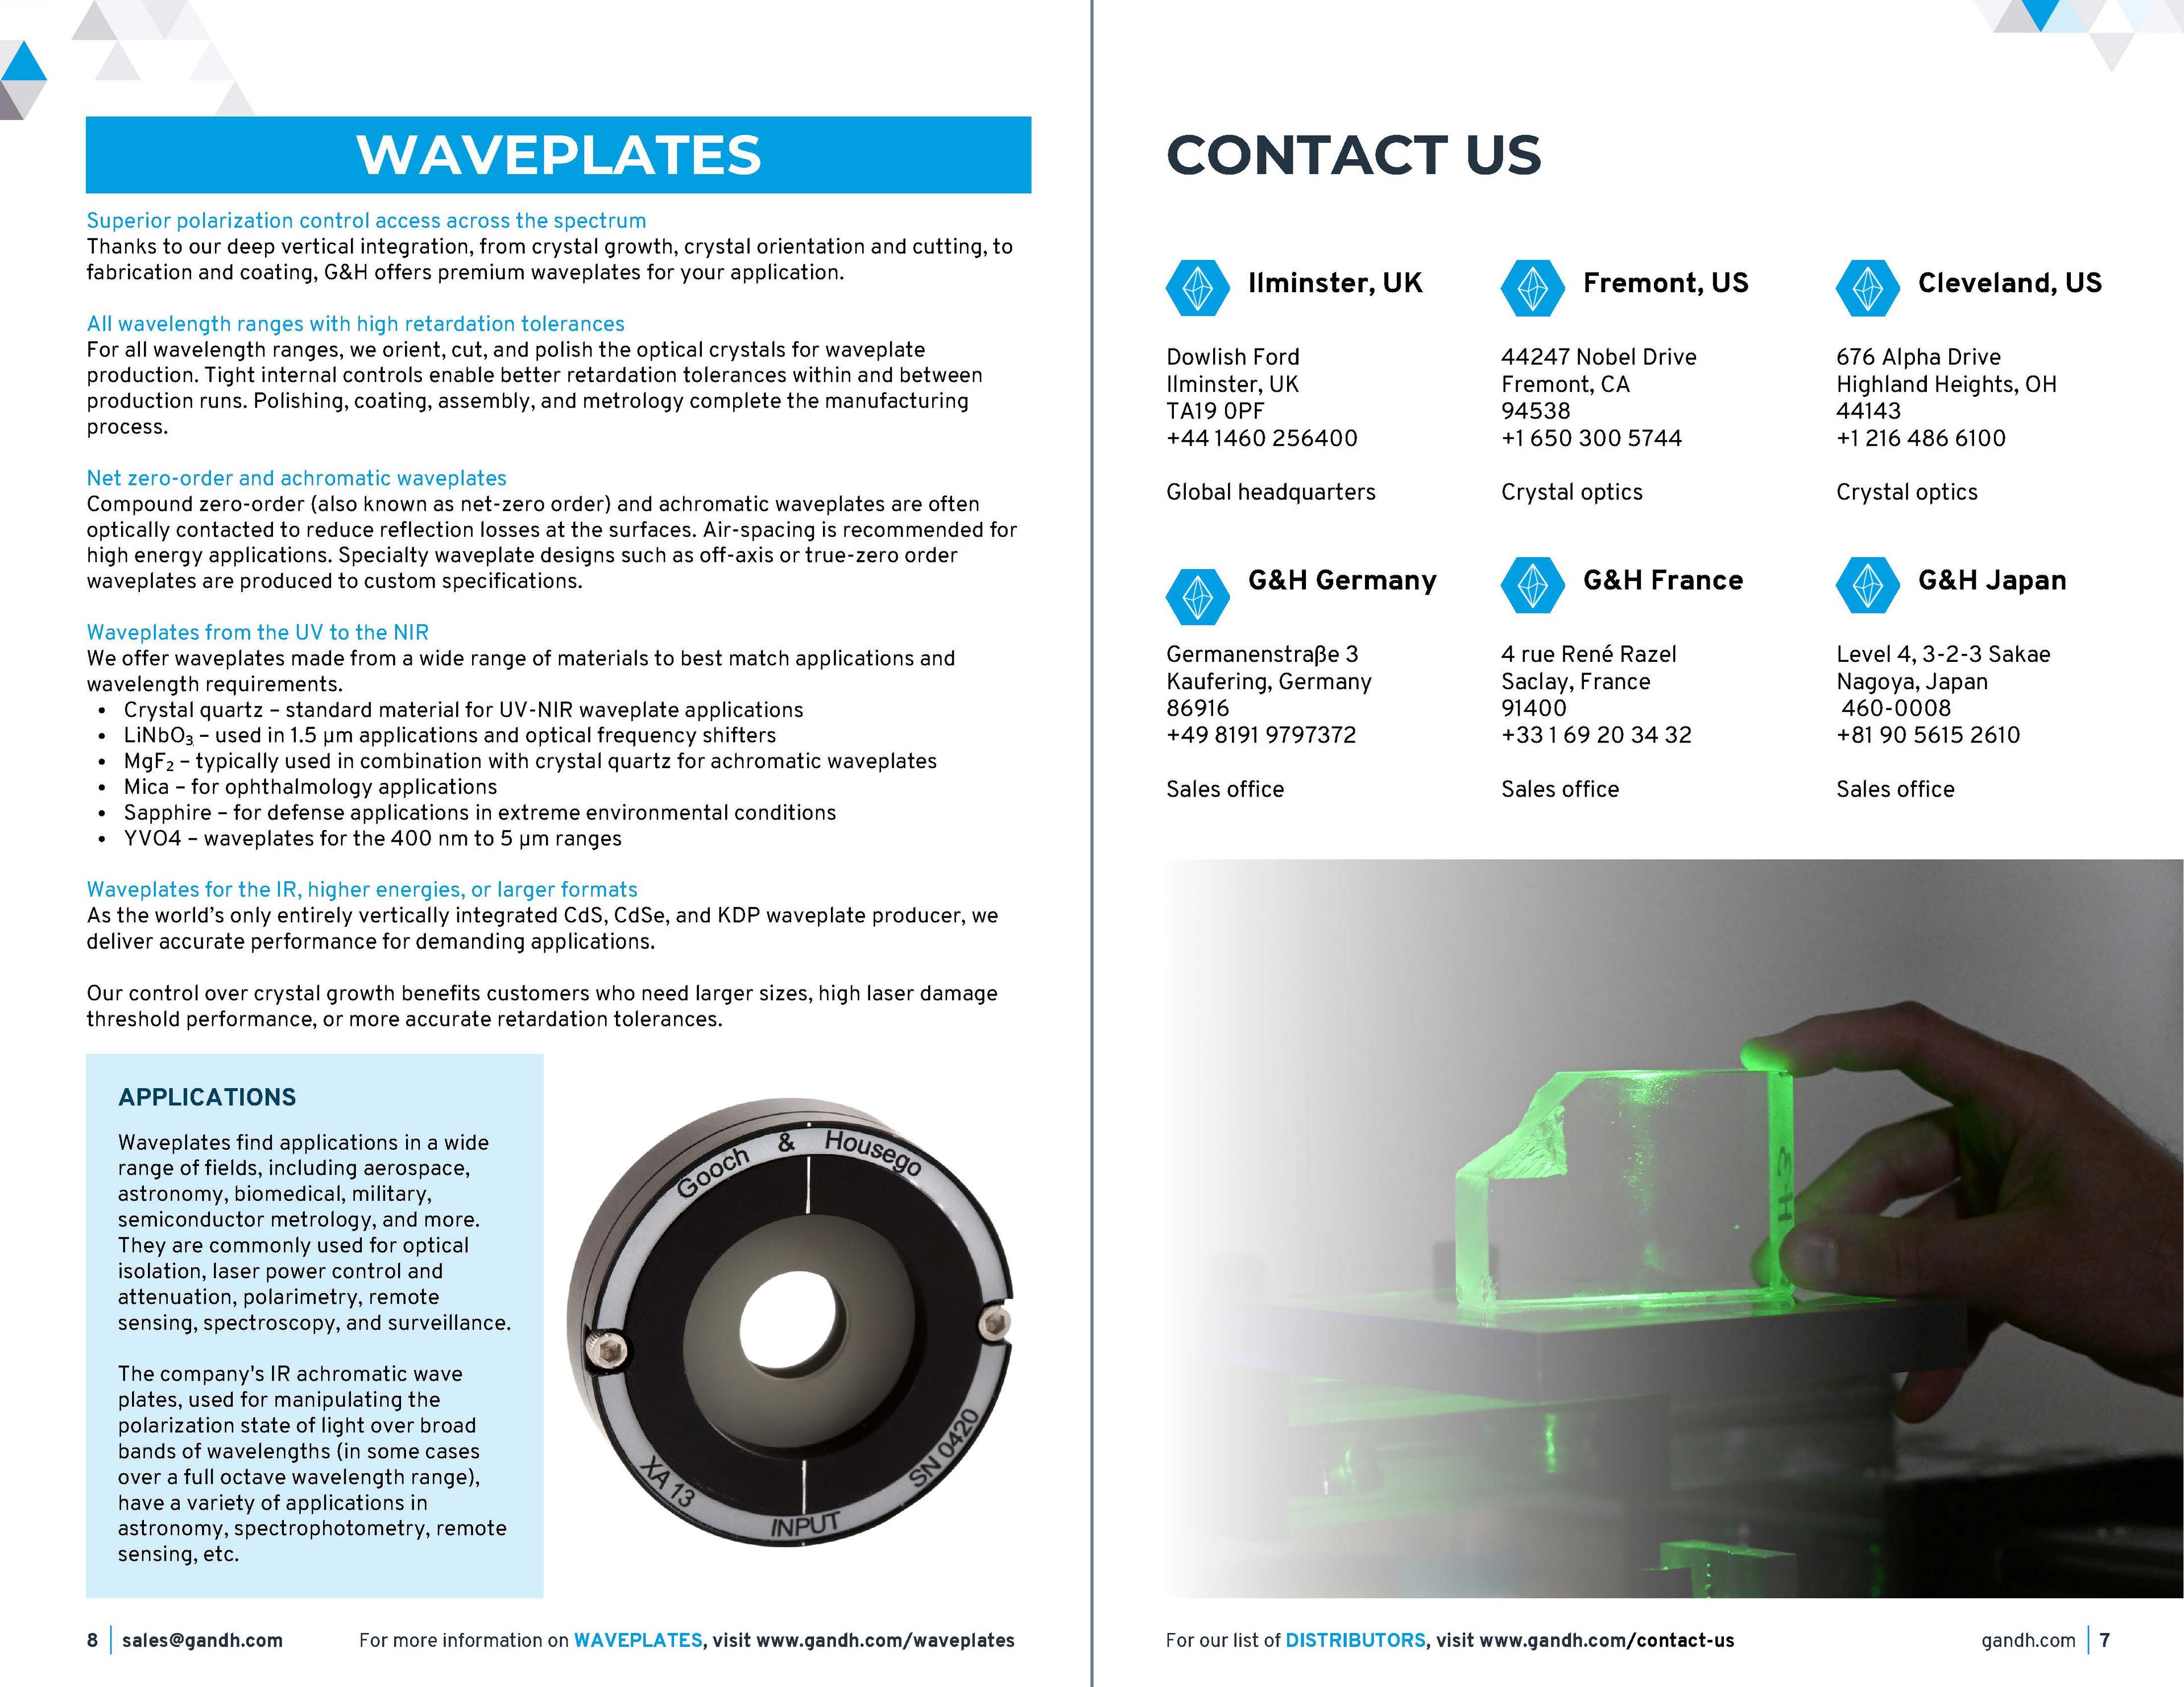 G&H Product & Solutions Guide - Crystal Optics Page 08-09